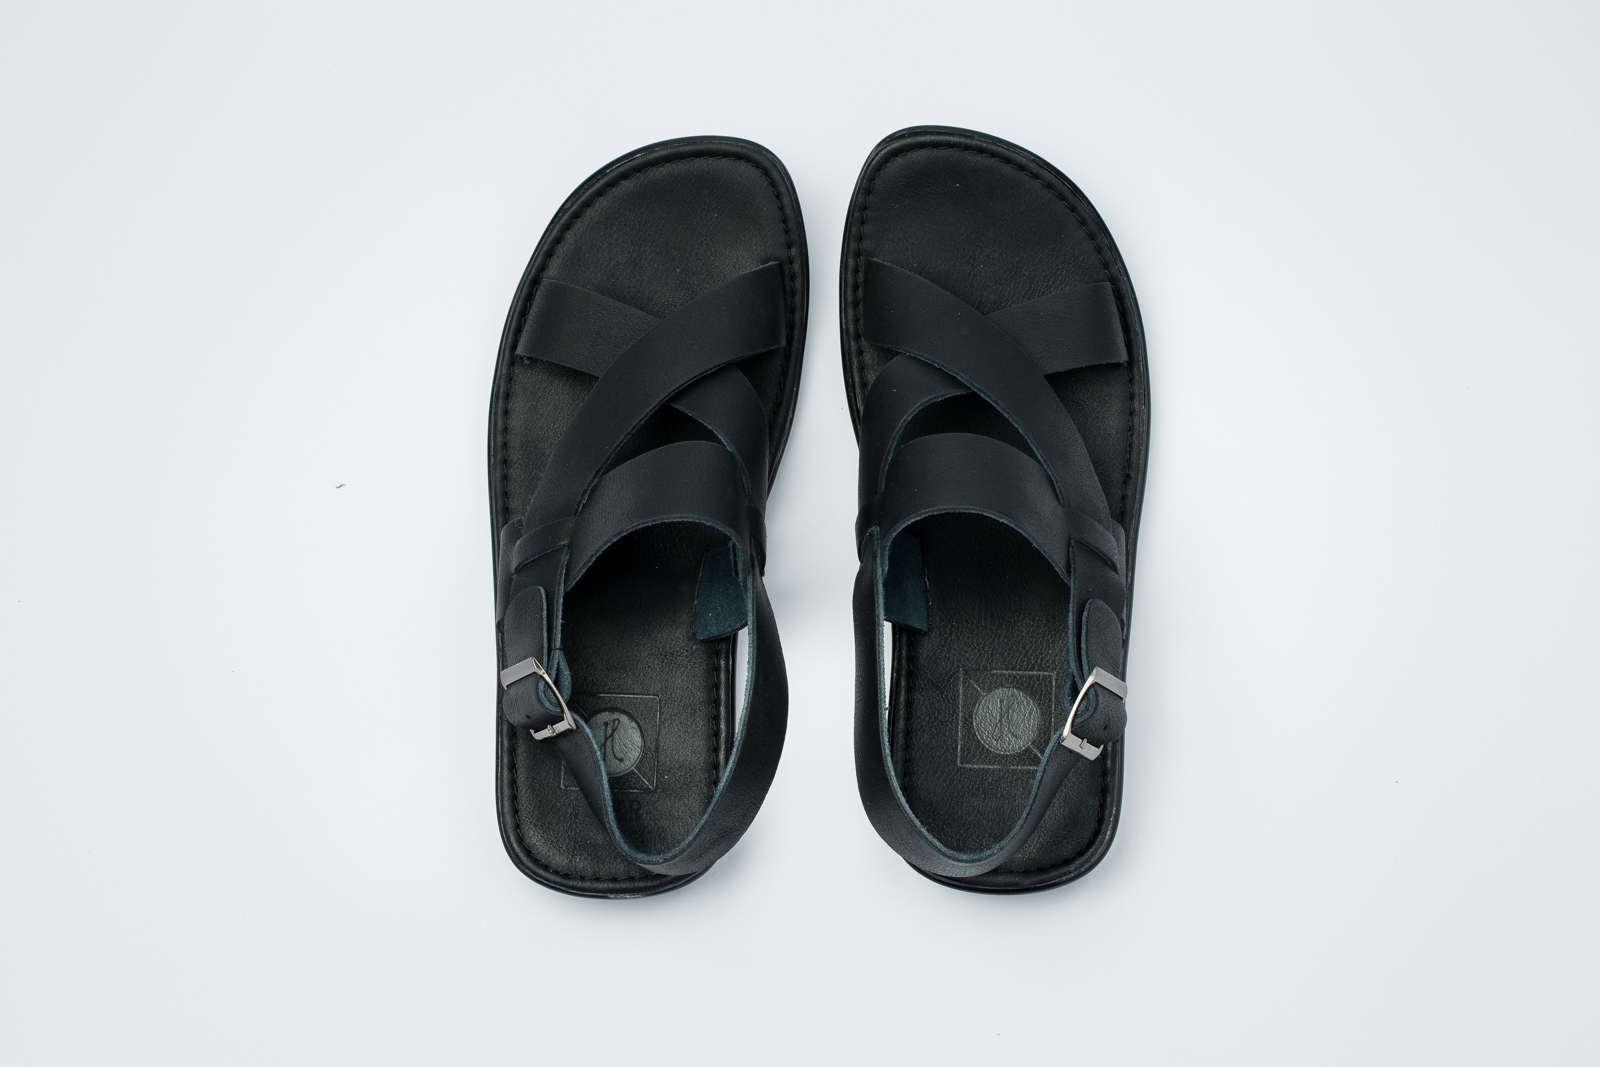 Picture of Black Sandals